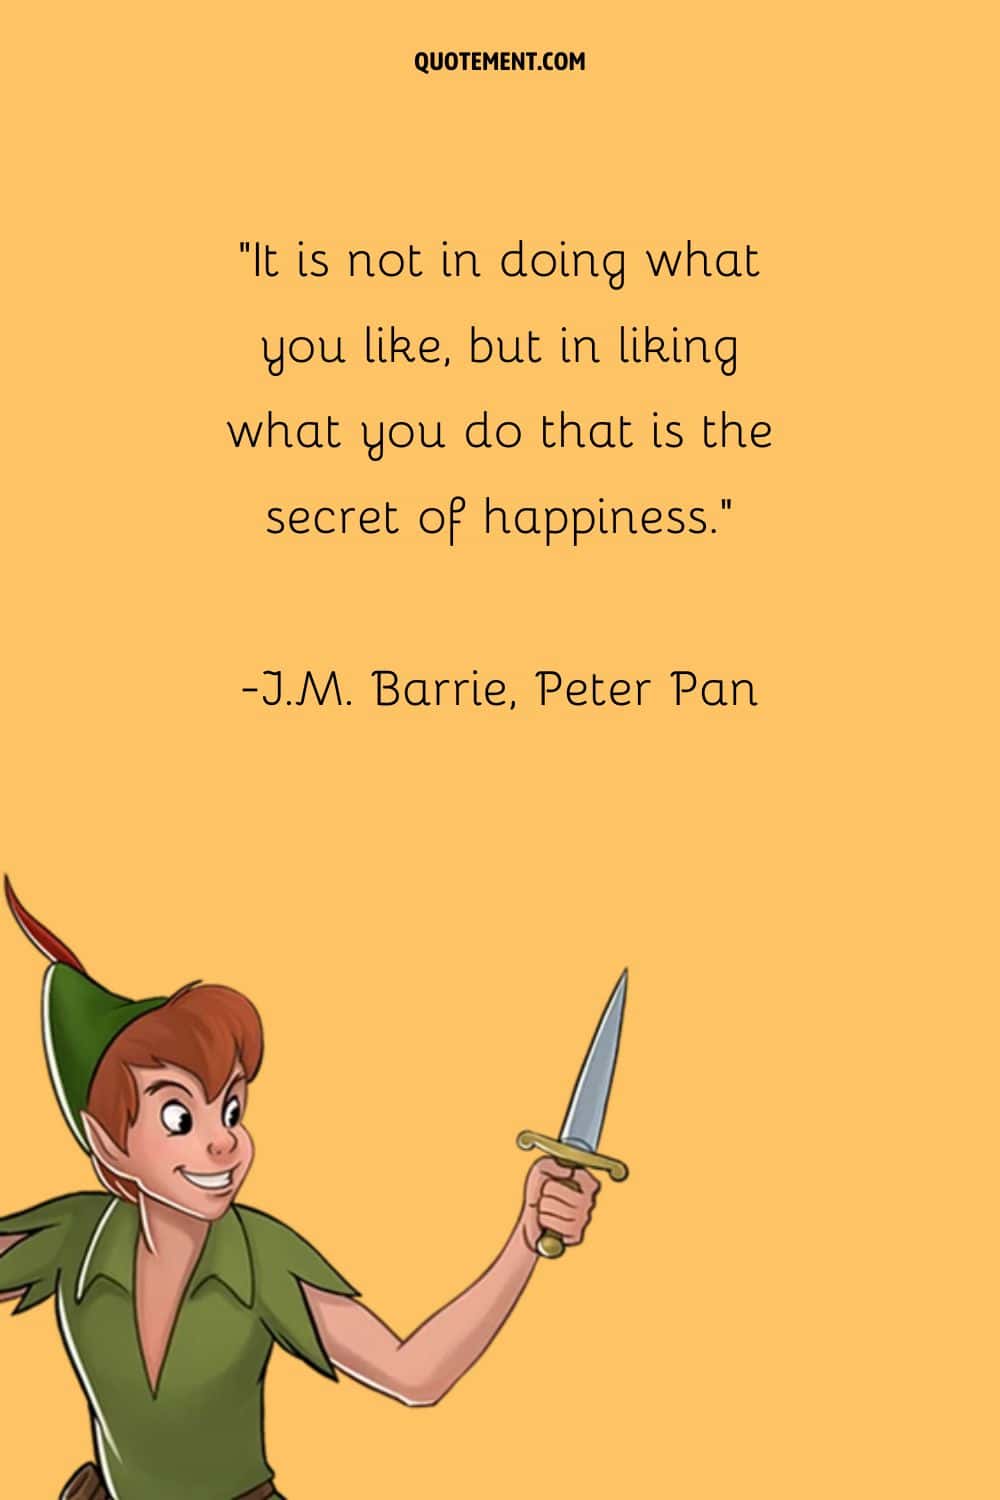 “It is not in doing what you like, but in liking what you do that is the secret of happiness.” ― J.M. Barrie, Peter Pan